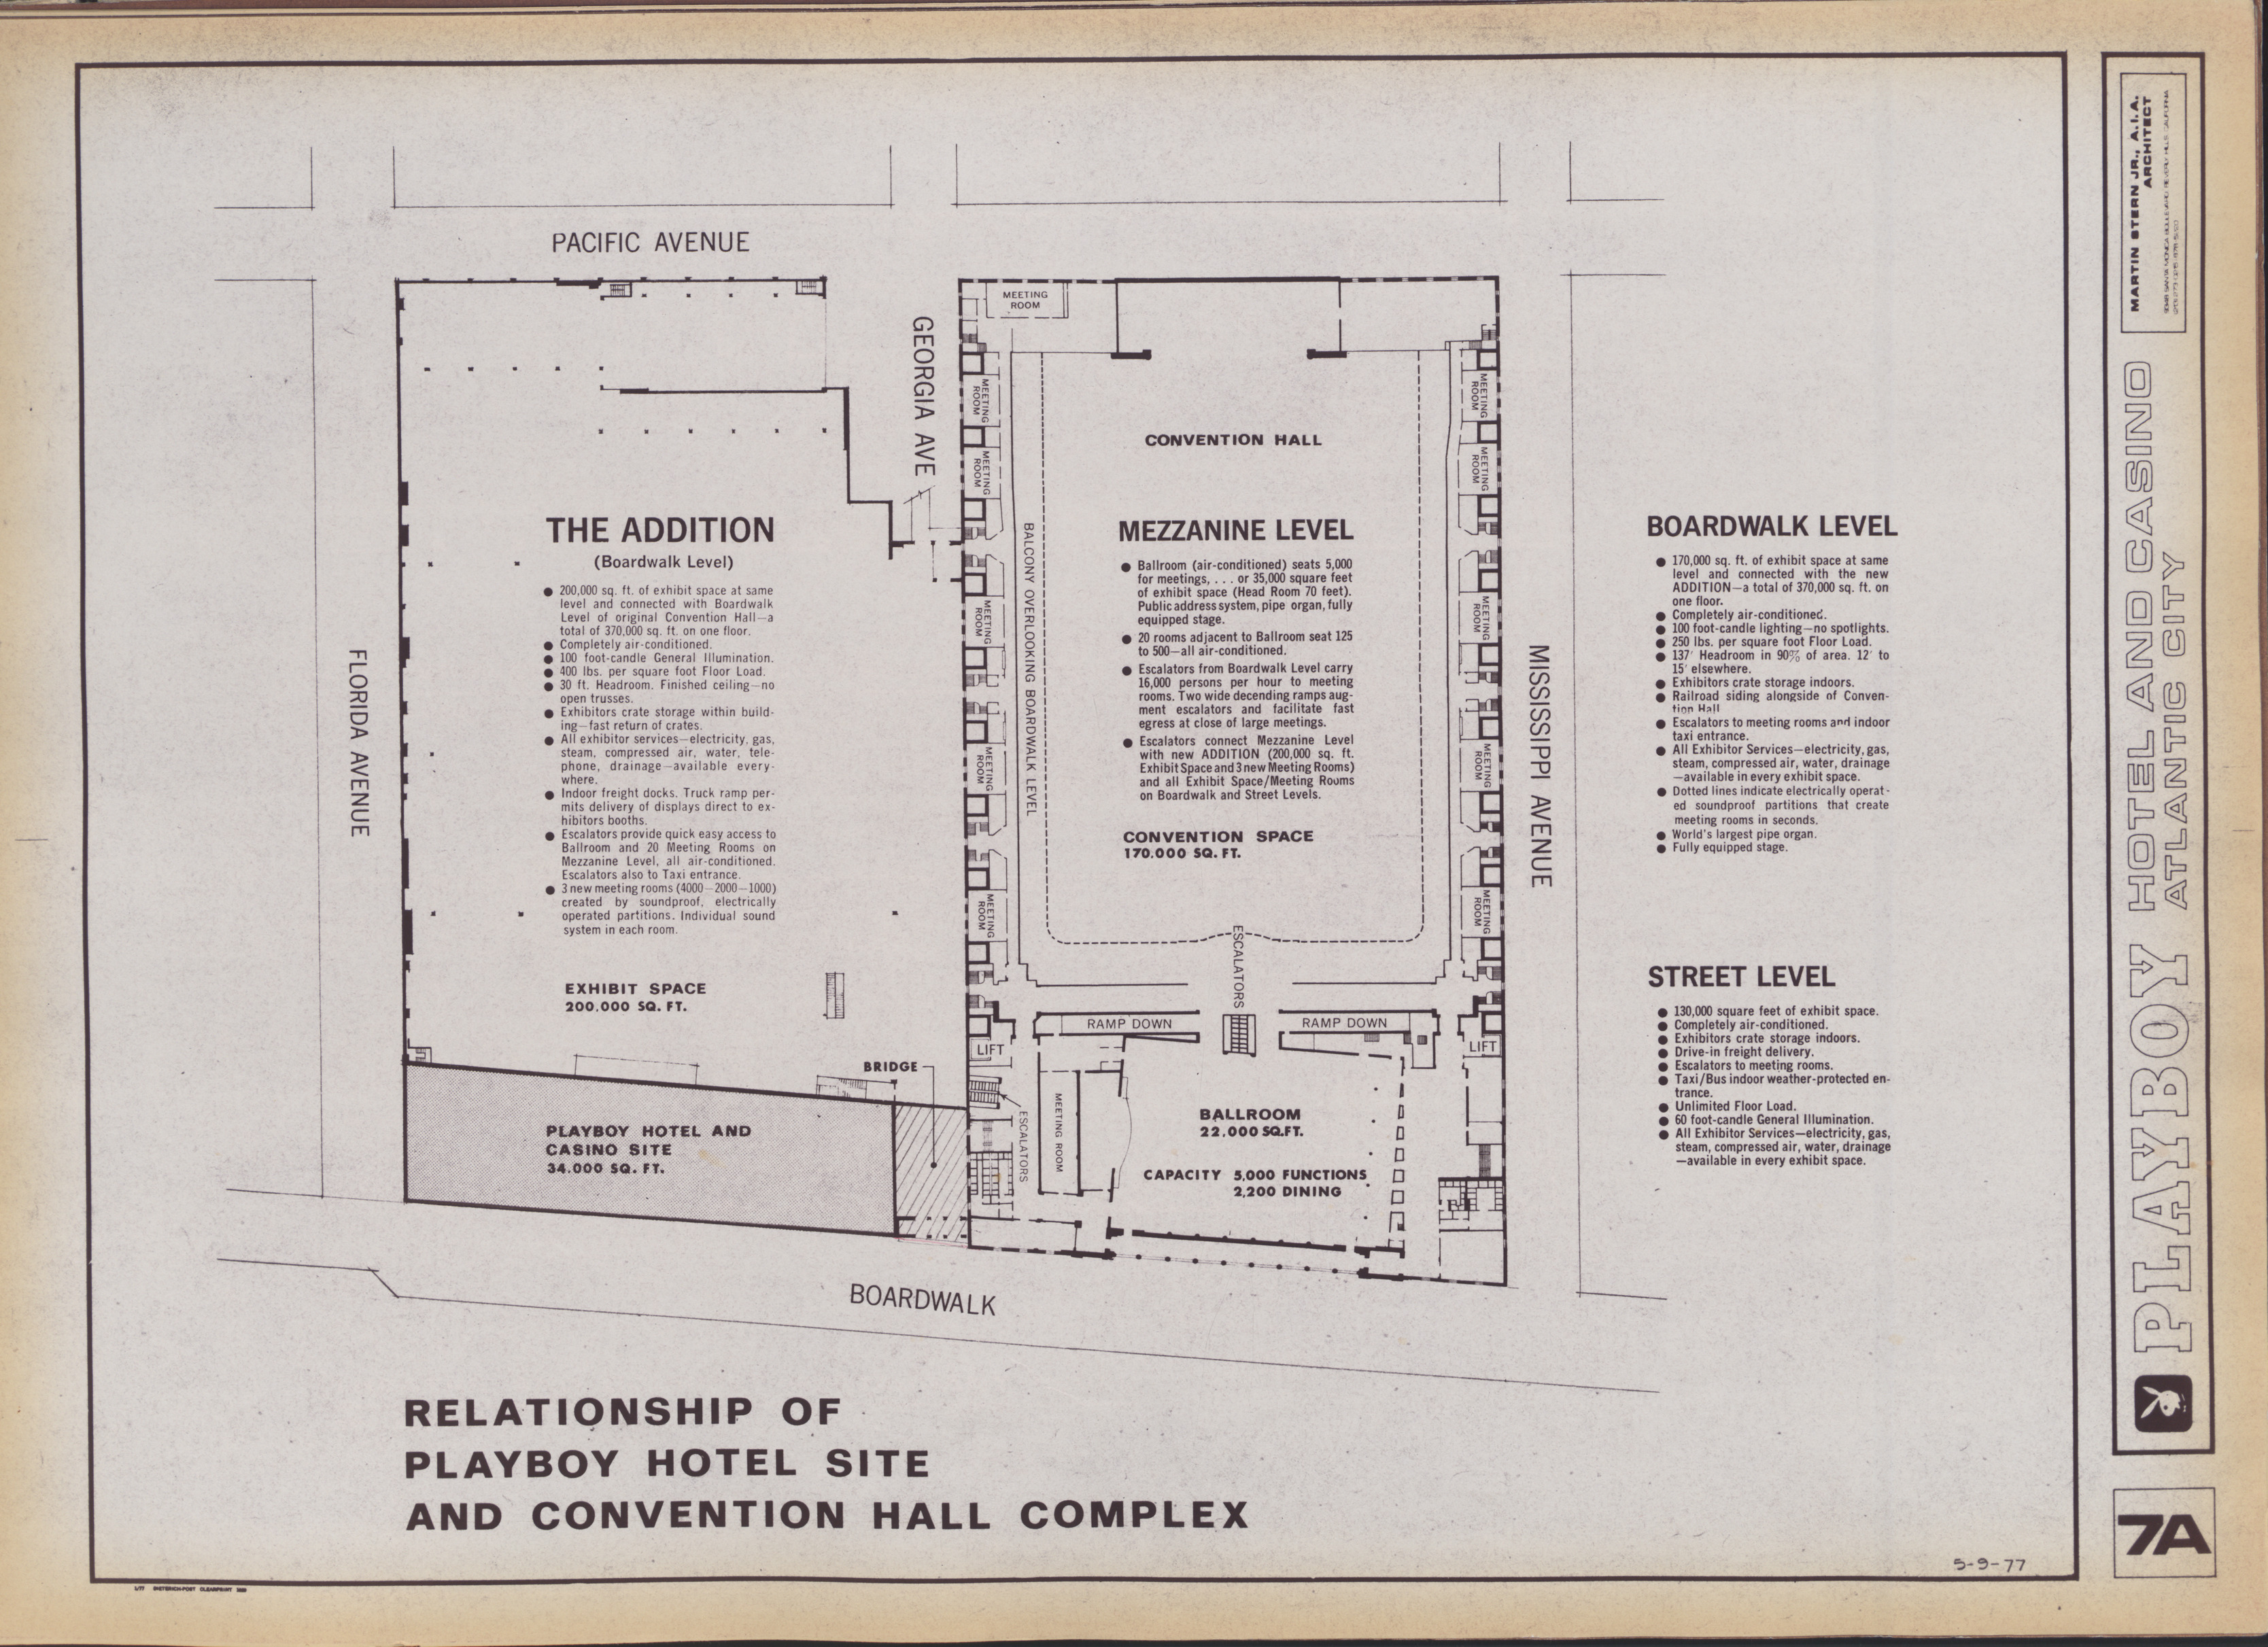 Playboy Hotel and Casino Proposal, image 7A